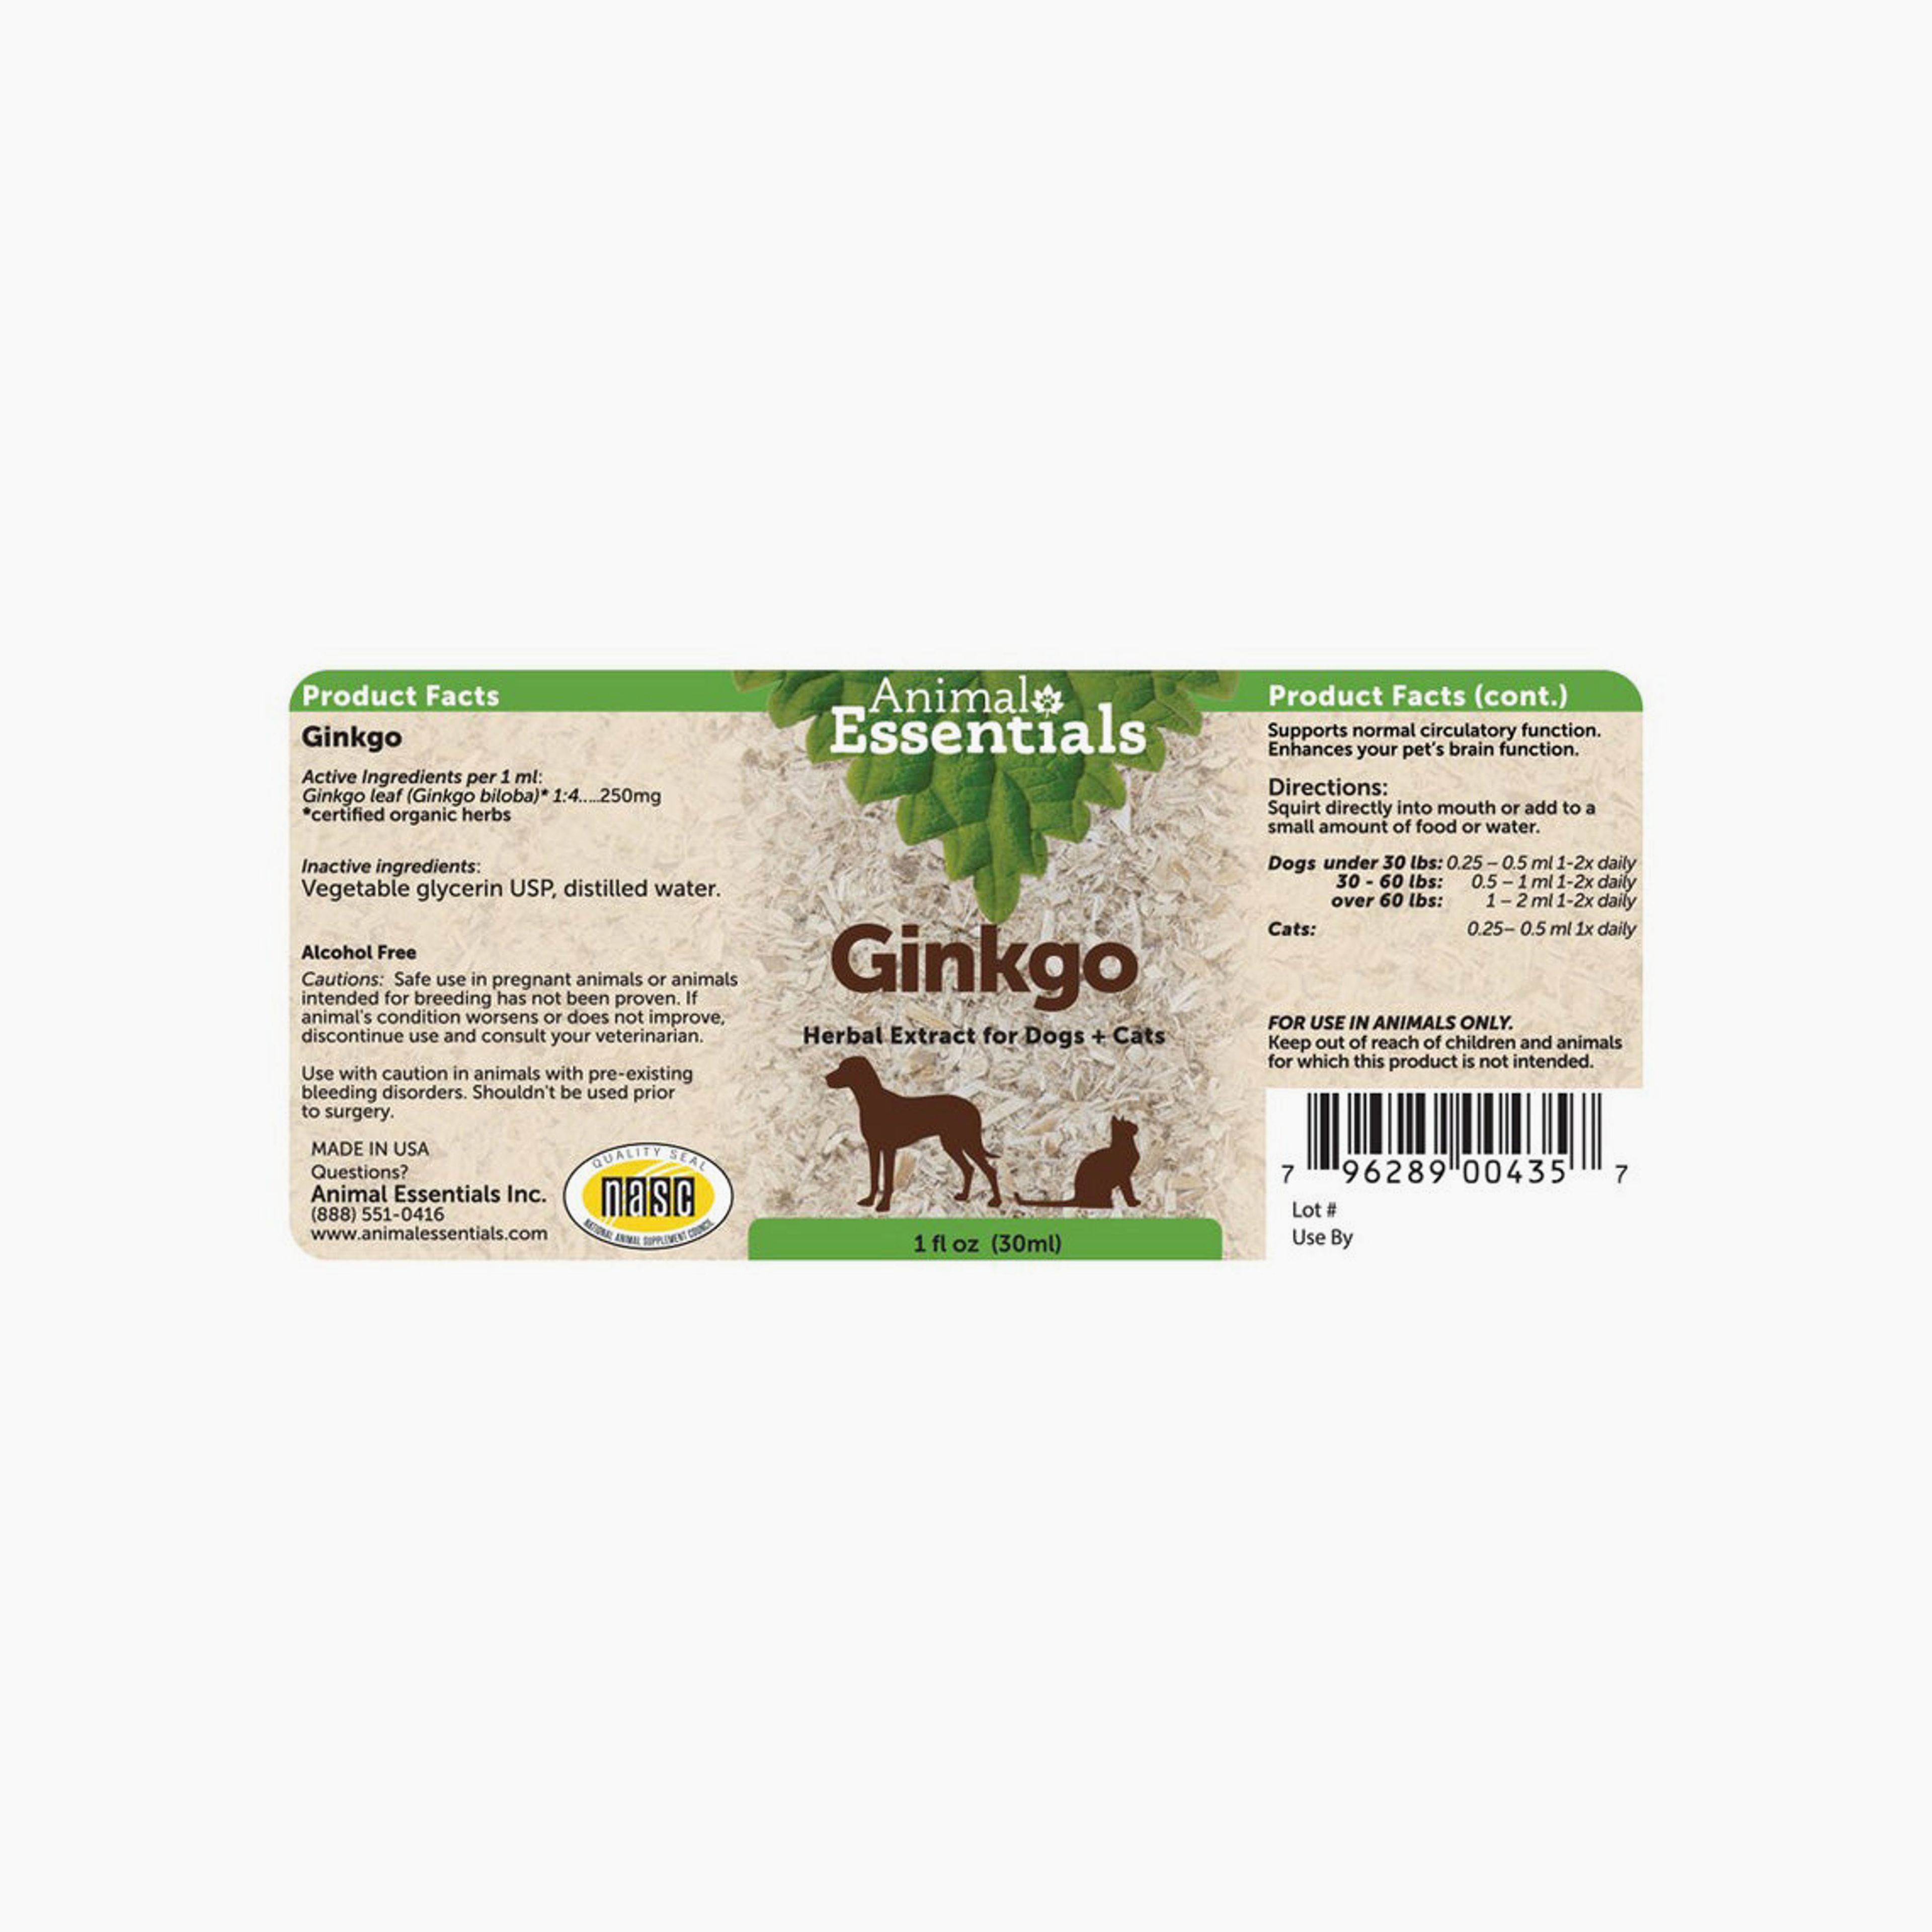 Animal Essentials Ginkgo Liquid Herbal Extract for Dogs & Cats